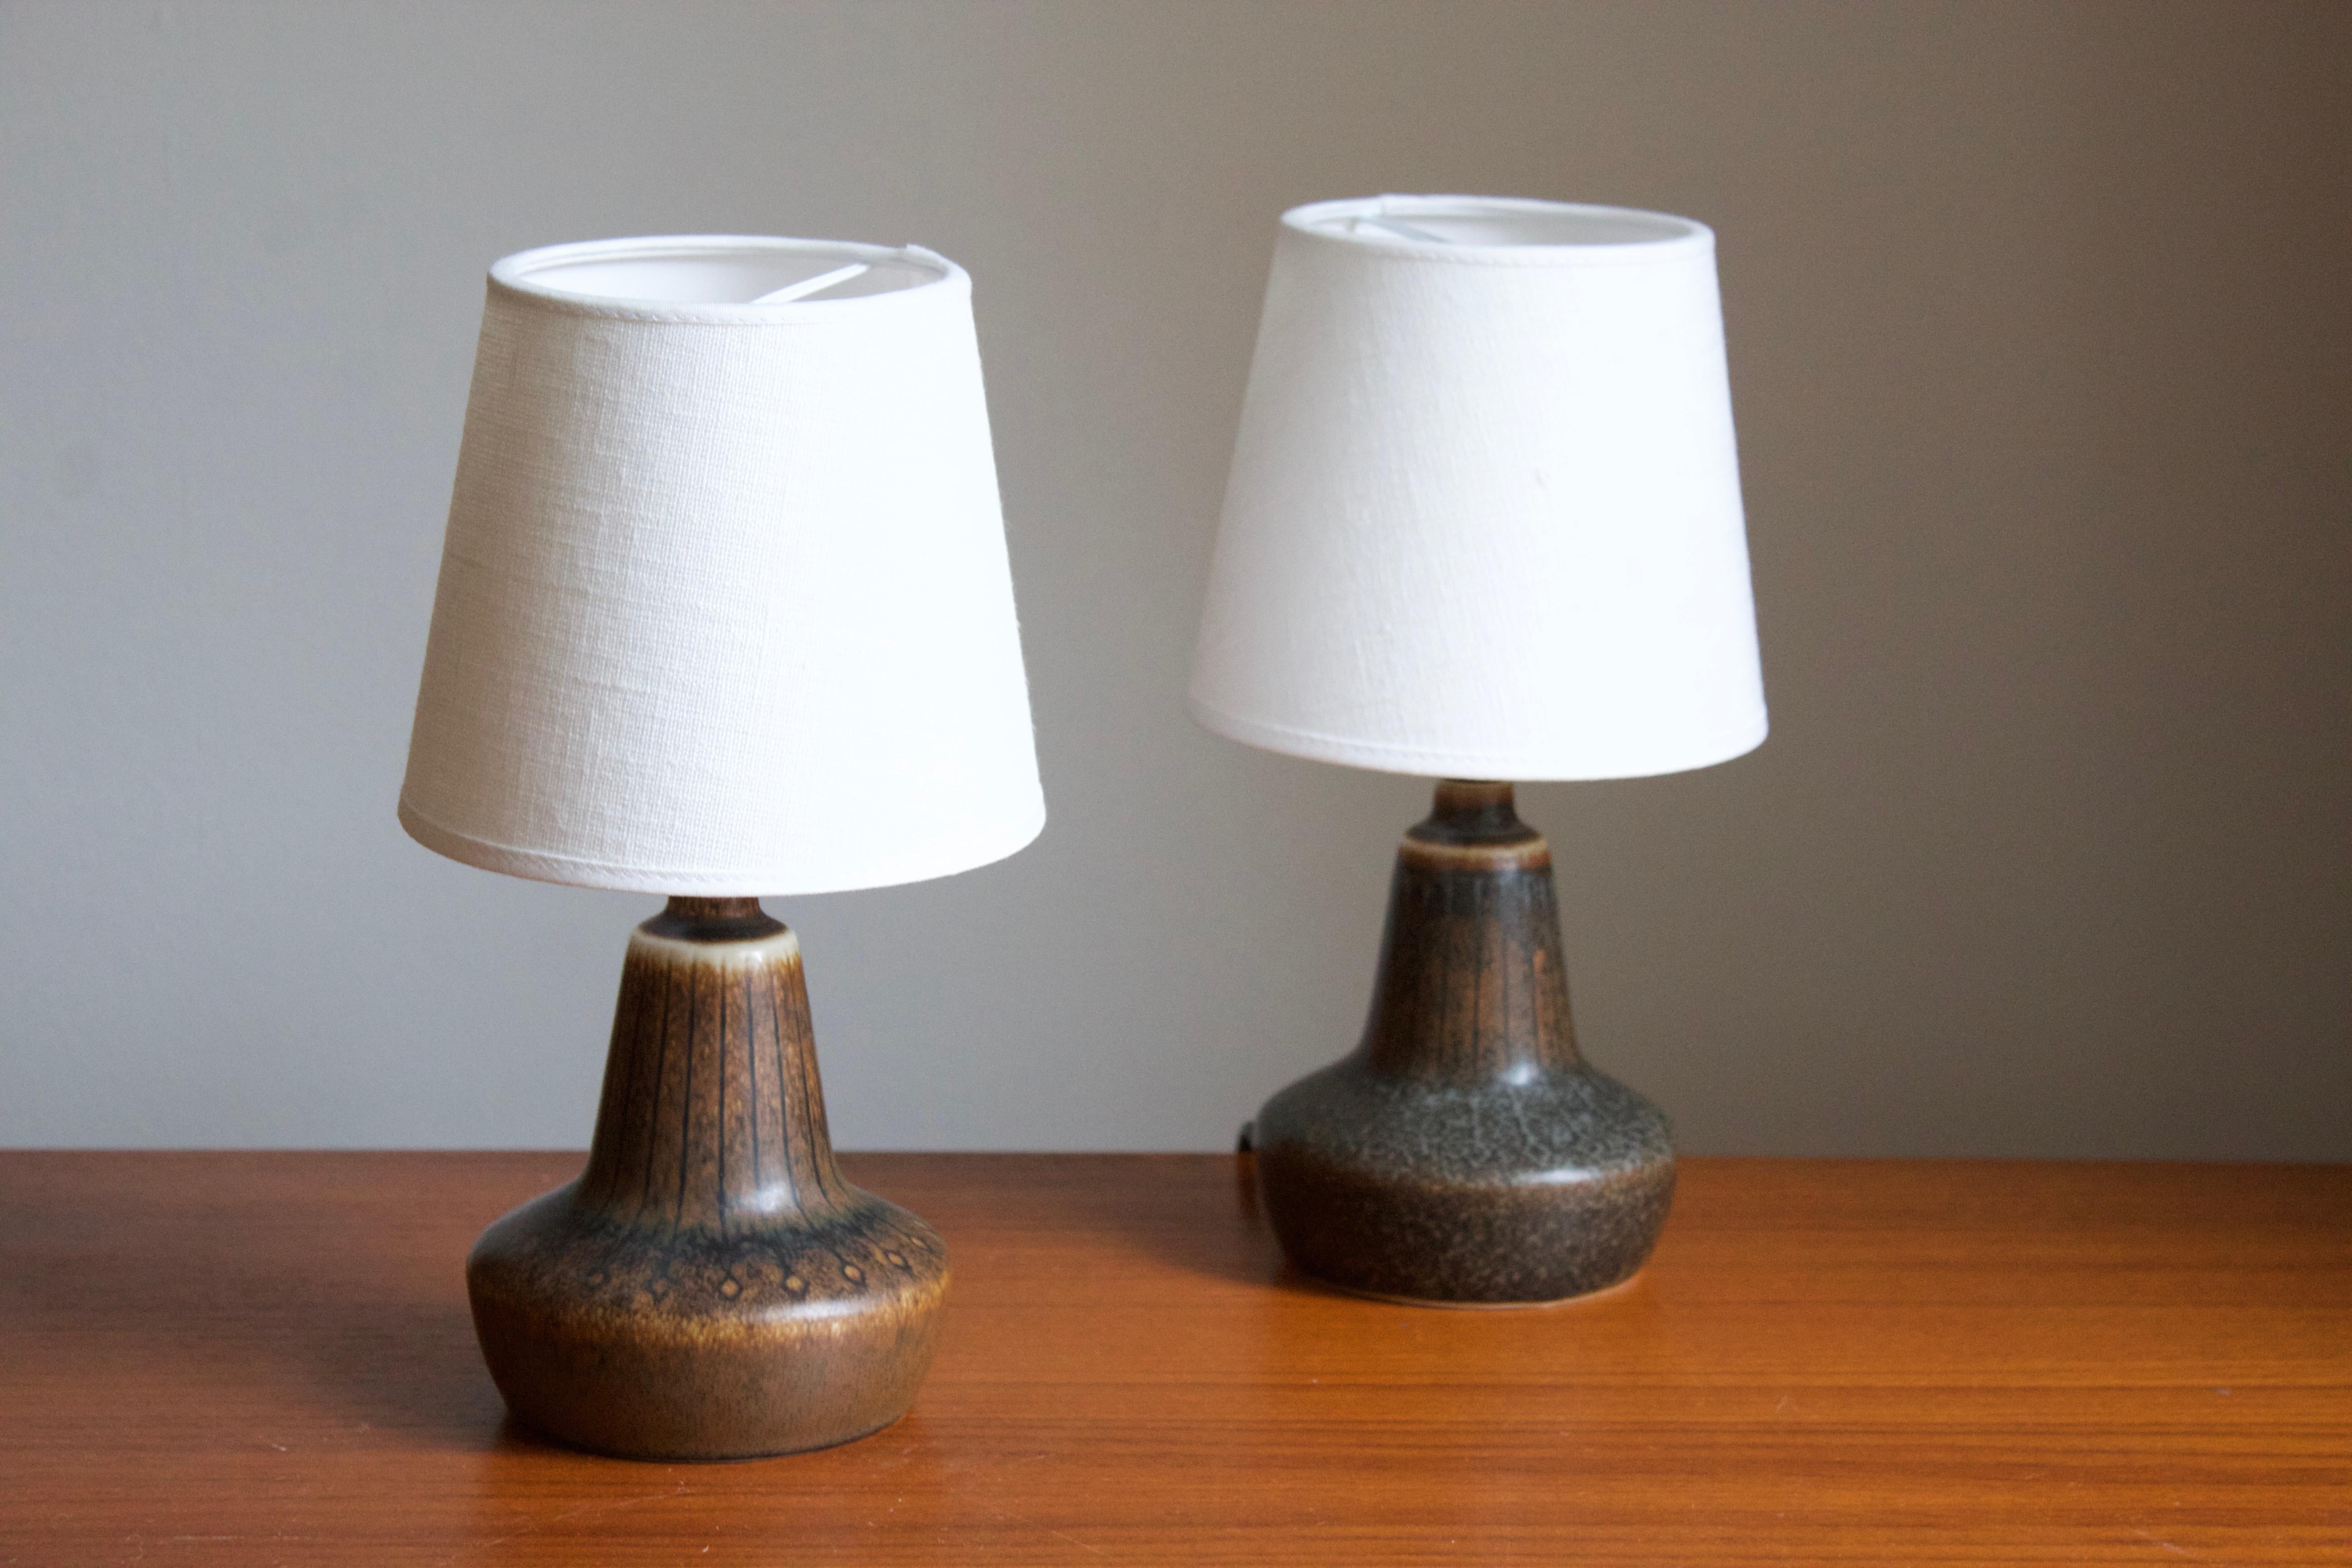 A pair of table lamps produced by Rörstrand, Sweden, 1950s. Designed by Gunnar Nylund, (Swedish, 1914-1997). Signed. Sold without lampshades. Pair sourced from one estate.

Nylund served as artistic director at Rörstrand, where he worked, 1931-1955.